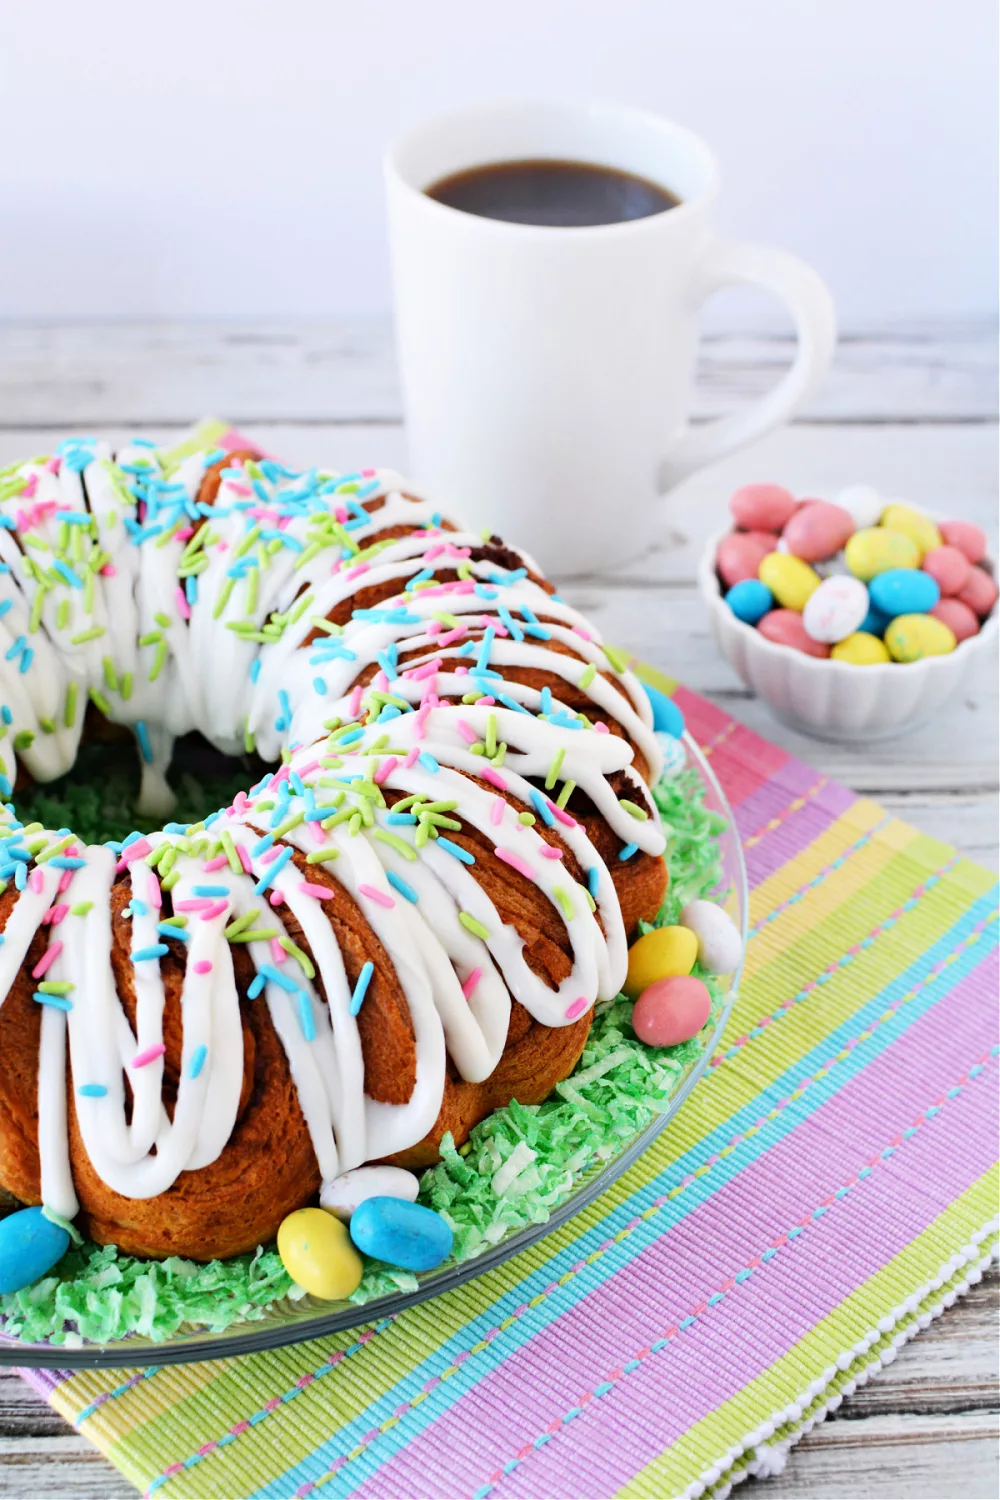 Easter cake made from cinnamon rolls in a bundt cake pan